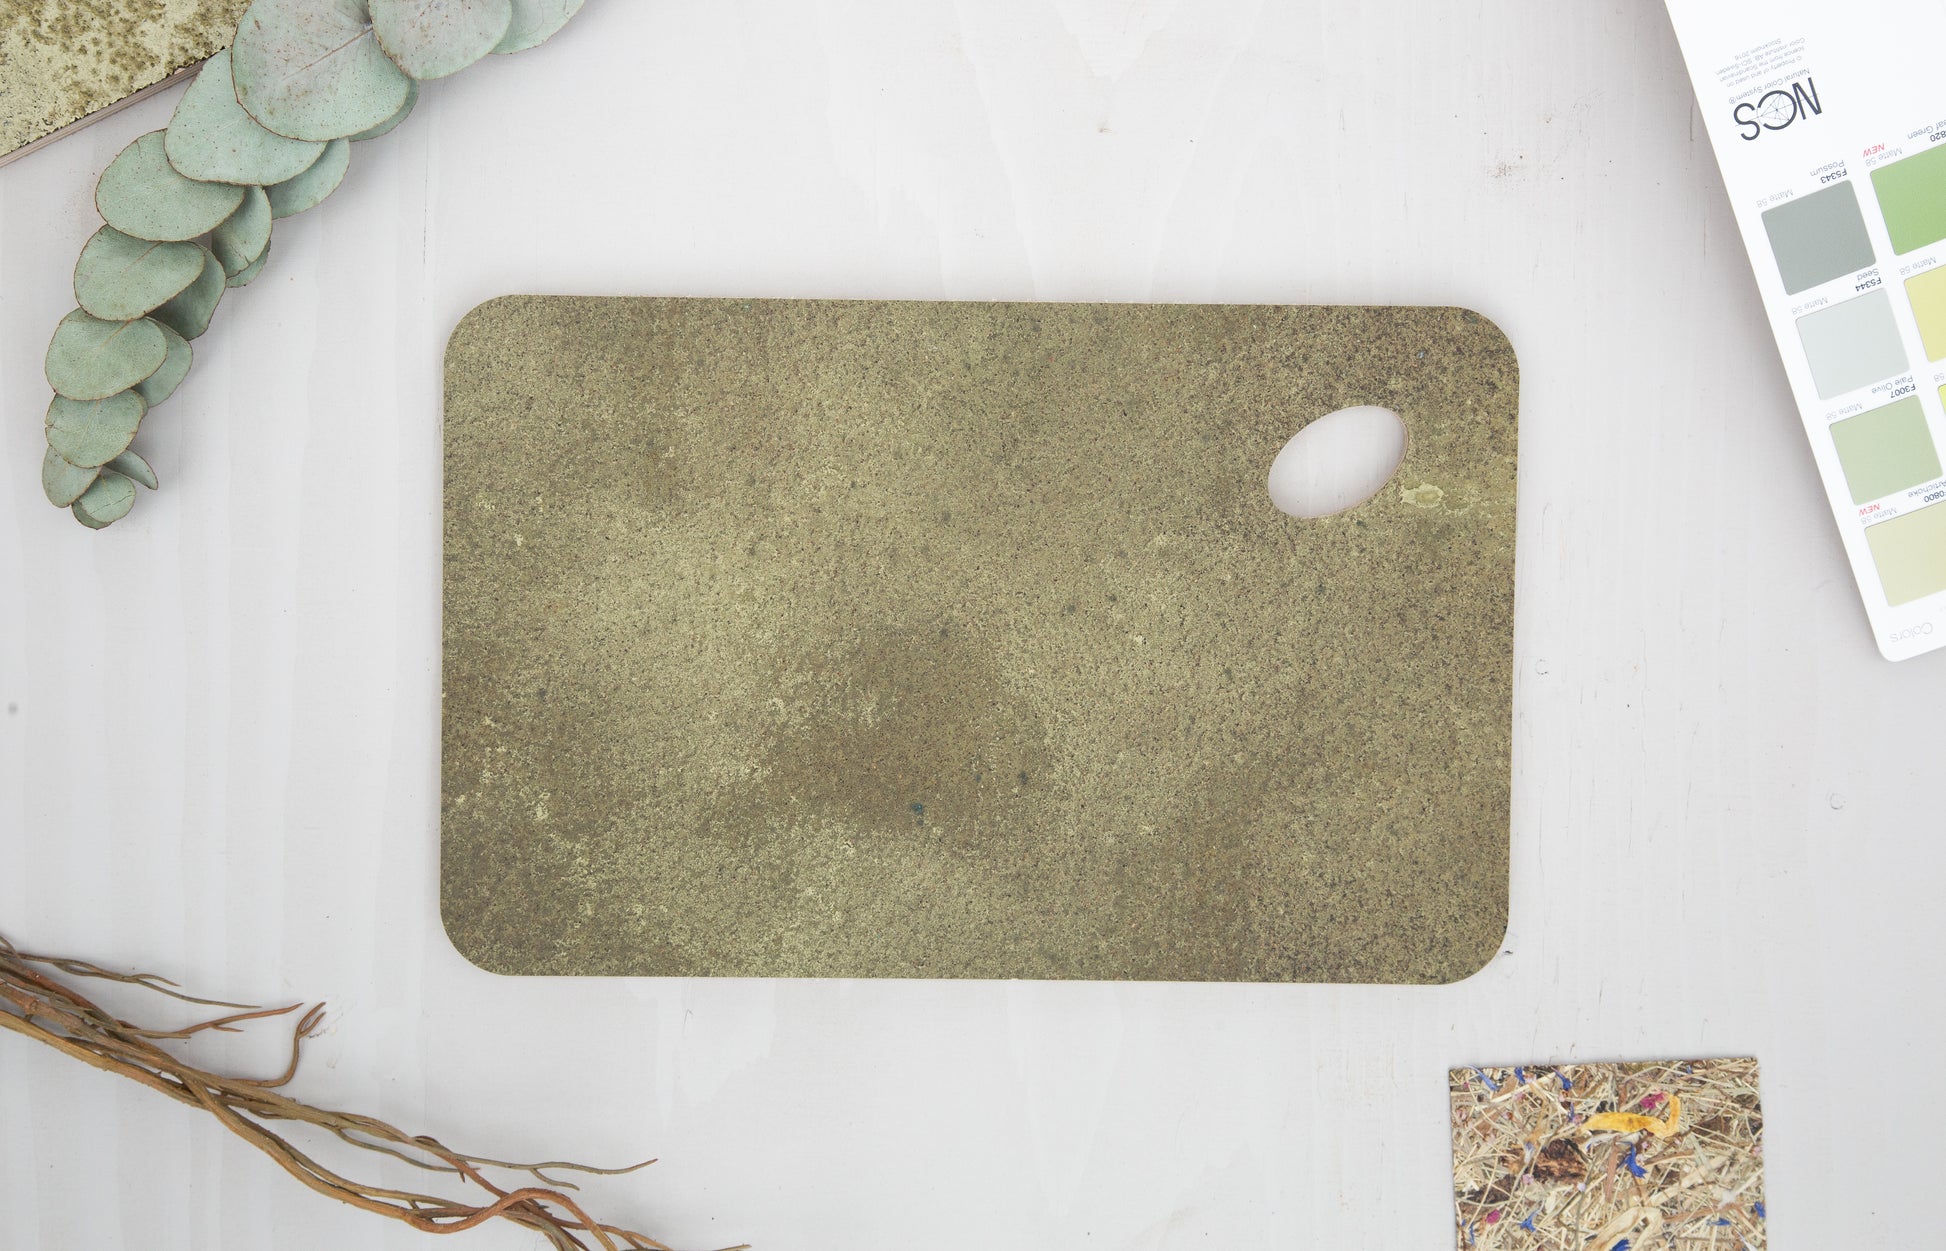 A close up of a KAVA tray, made by pressing coffee waste and brass into birch plywood. The corners are rounded at a soft radius and one corner is an oval shaped hole so you can hold the tray with your thumb, or hang it on a hook.